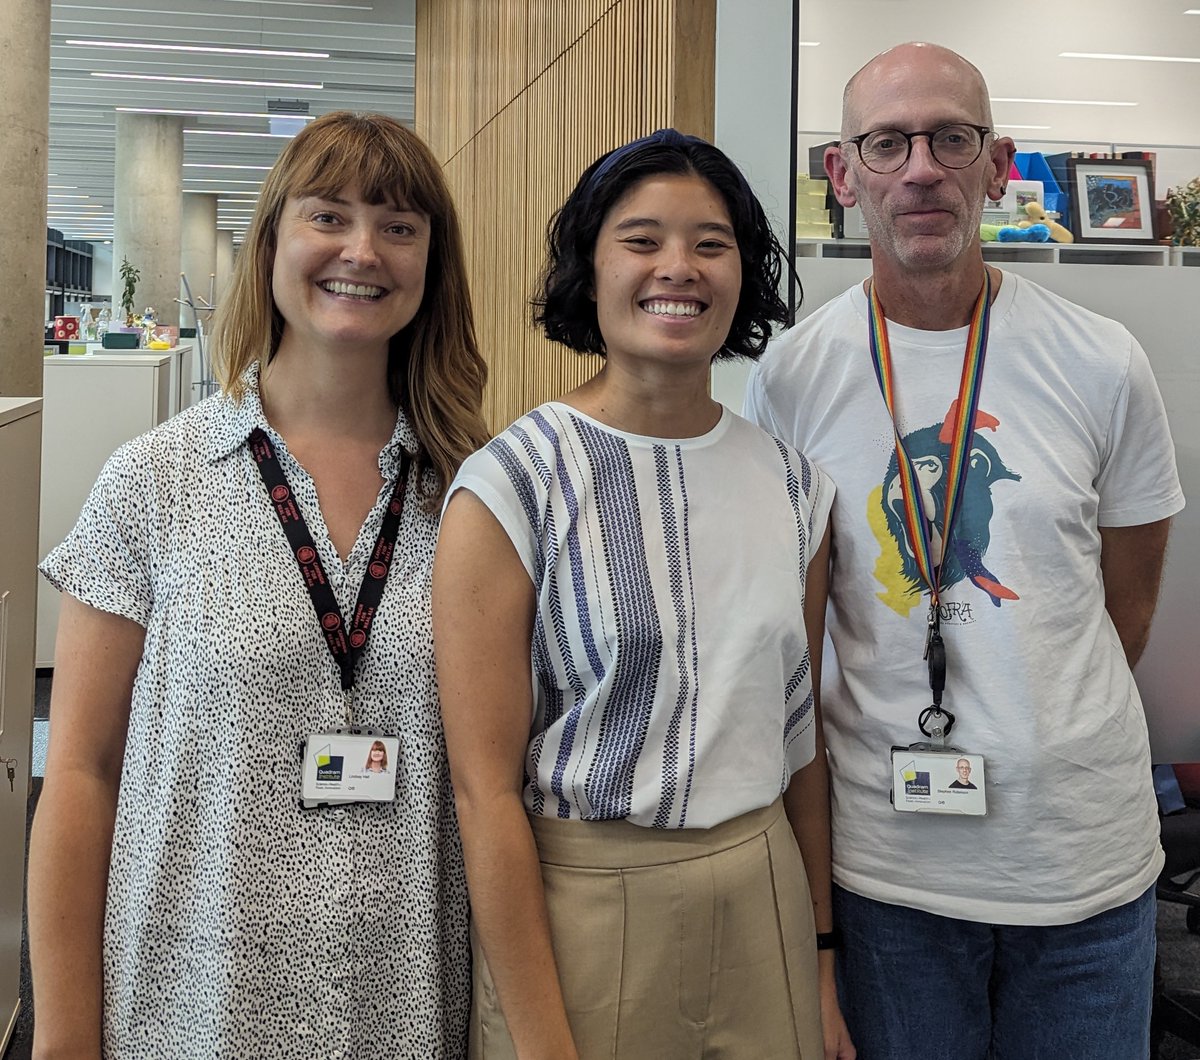 Two proud PhD supervisors today @hall_lab & @RobinsonLab_QIB! Huge congrats to @nteng18 on passing her viva with only minor corrections 🥳
Nancys @bigctweets PhD work was on #microbiome & #breastcancer with exciting outputs tbc..!
Thanks to examiners @ae_mather & @Caketin_Wade!